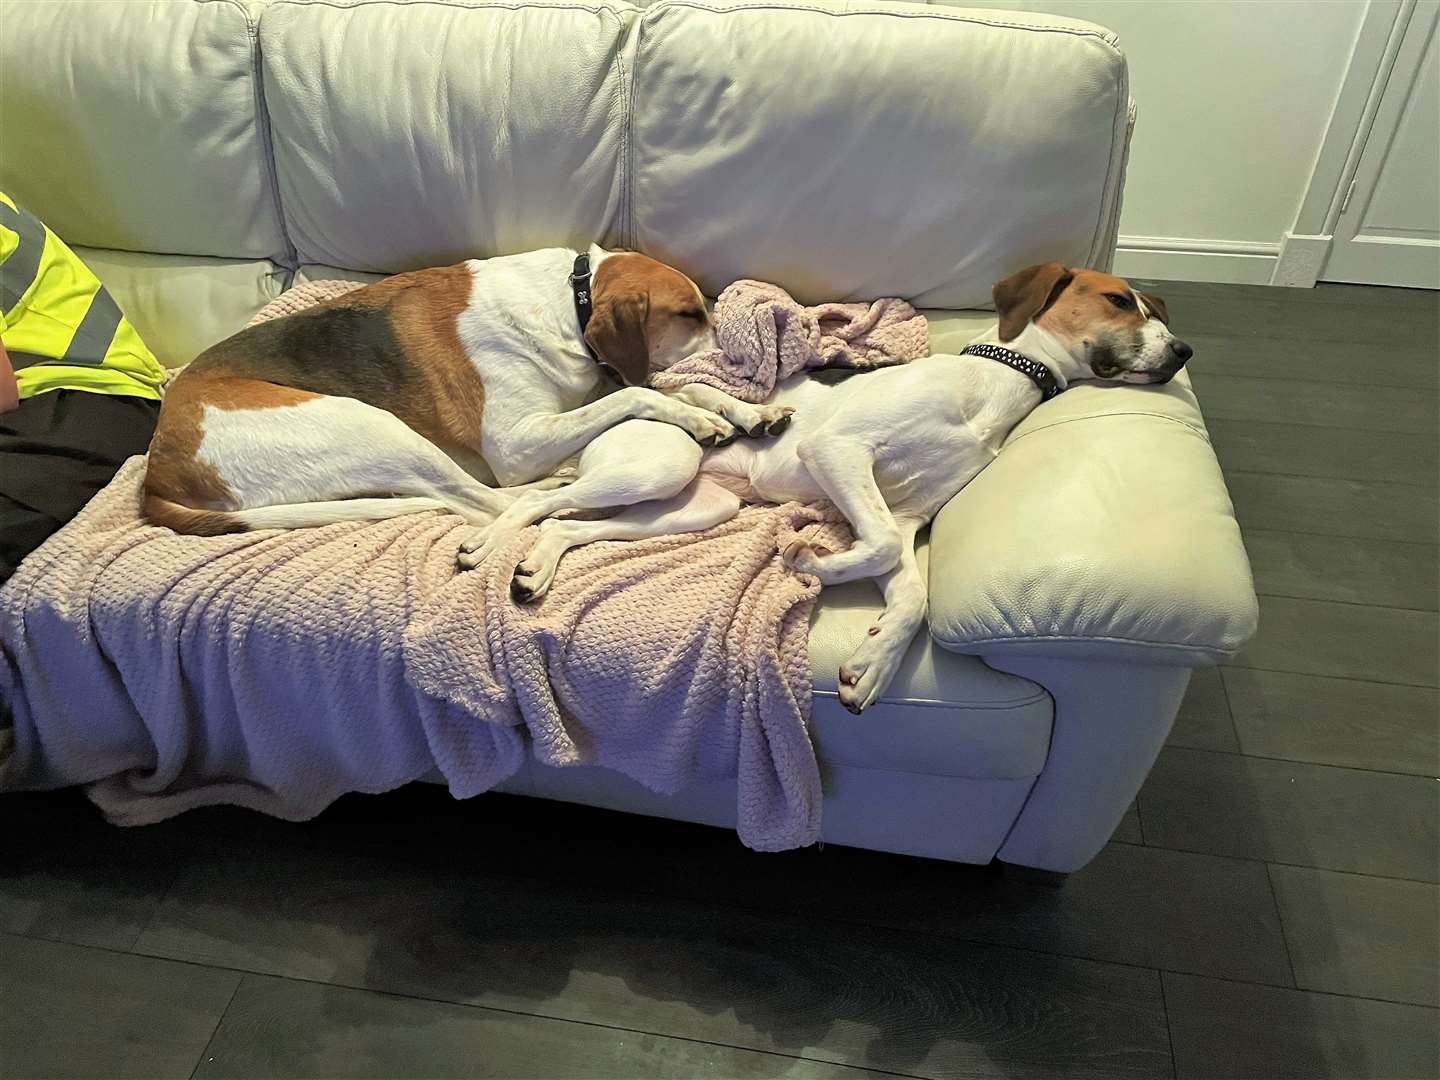 Daisy has now found her forever home with Max who is also a foxhound. Picture: SSPCA